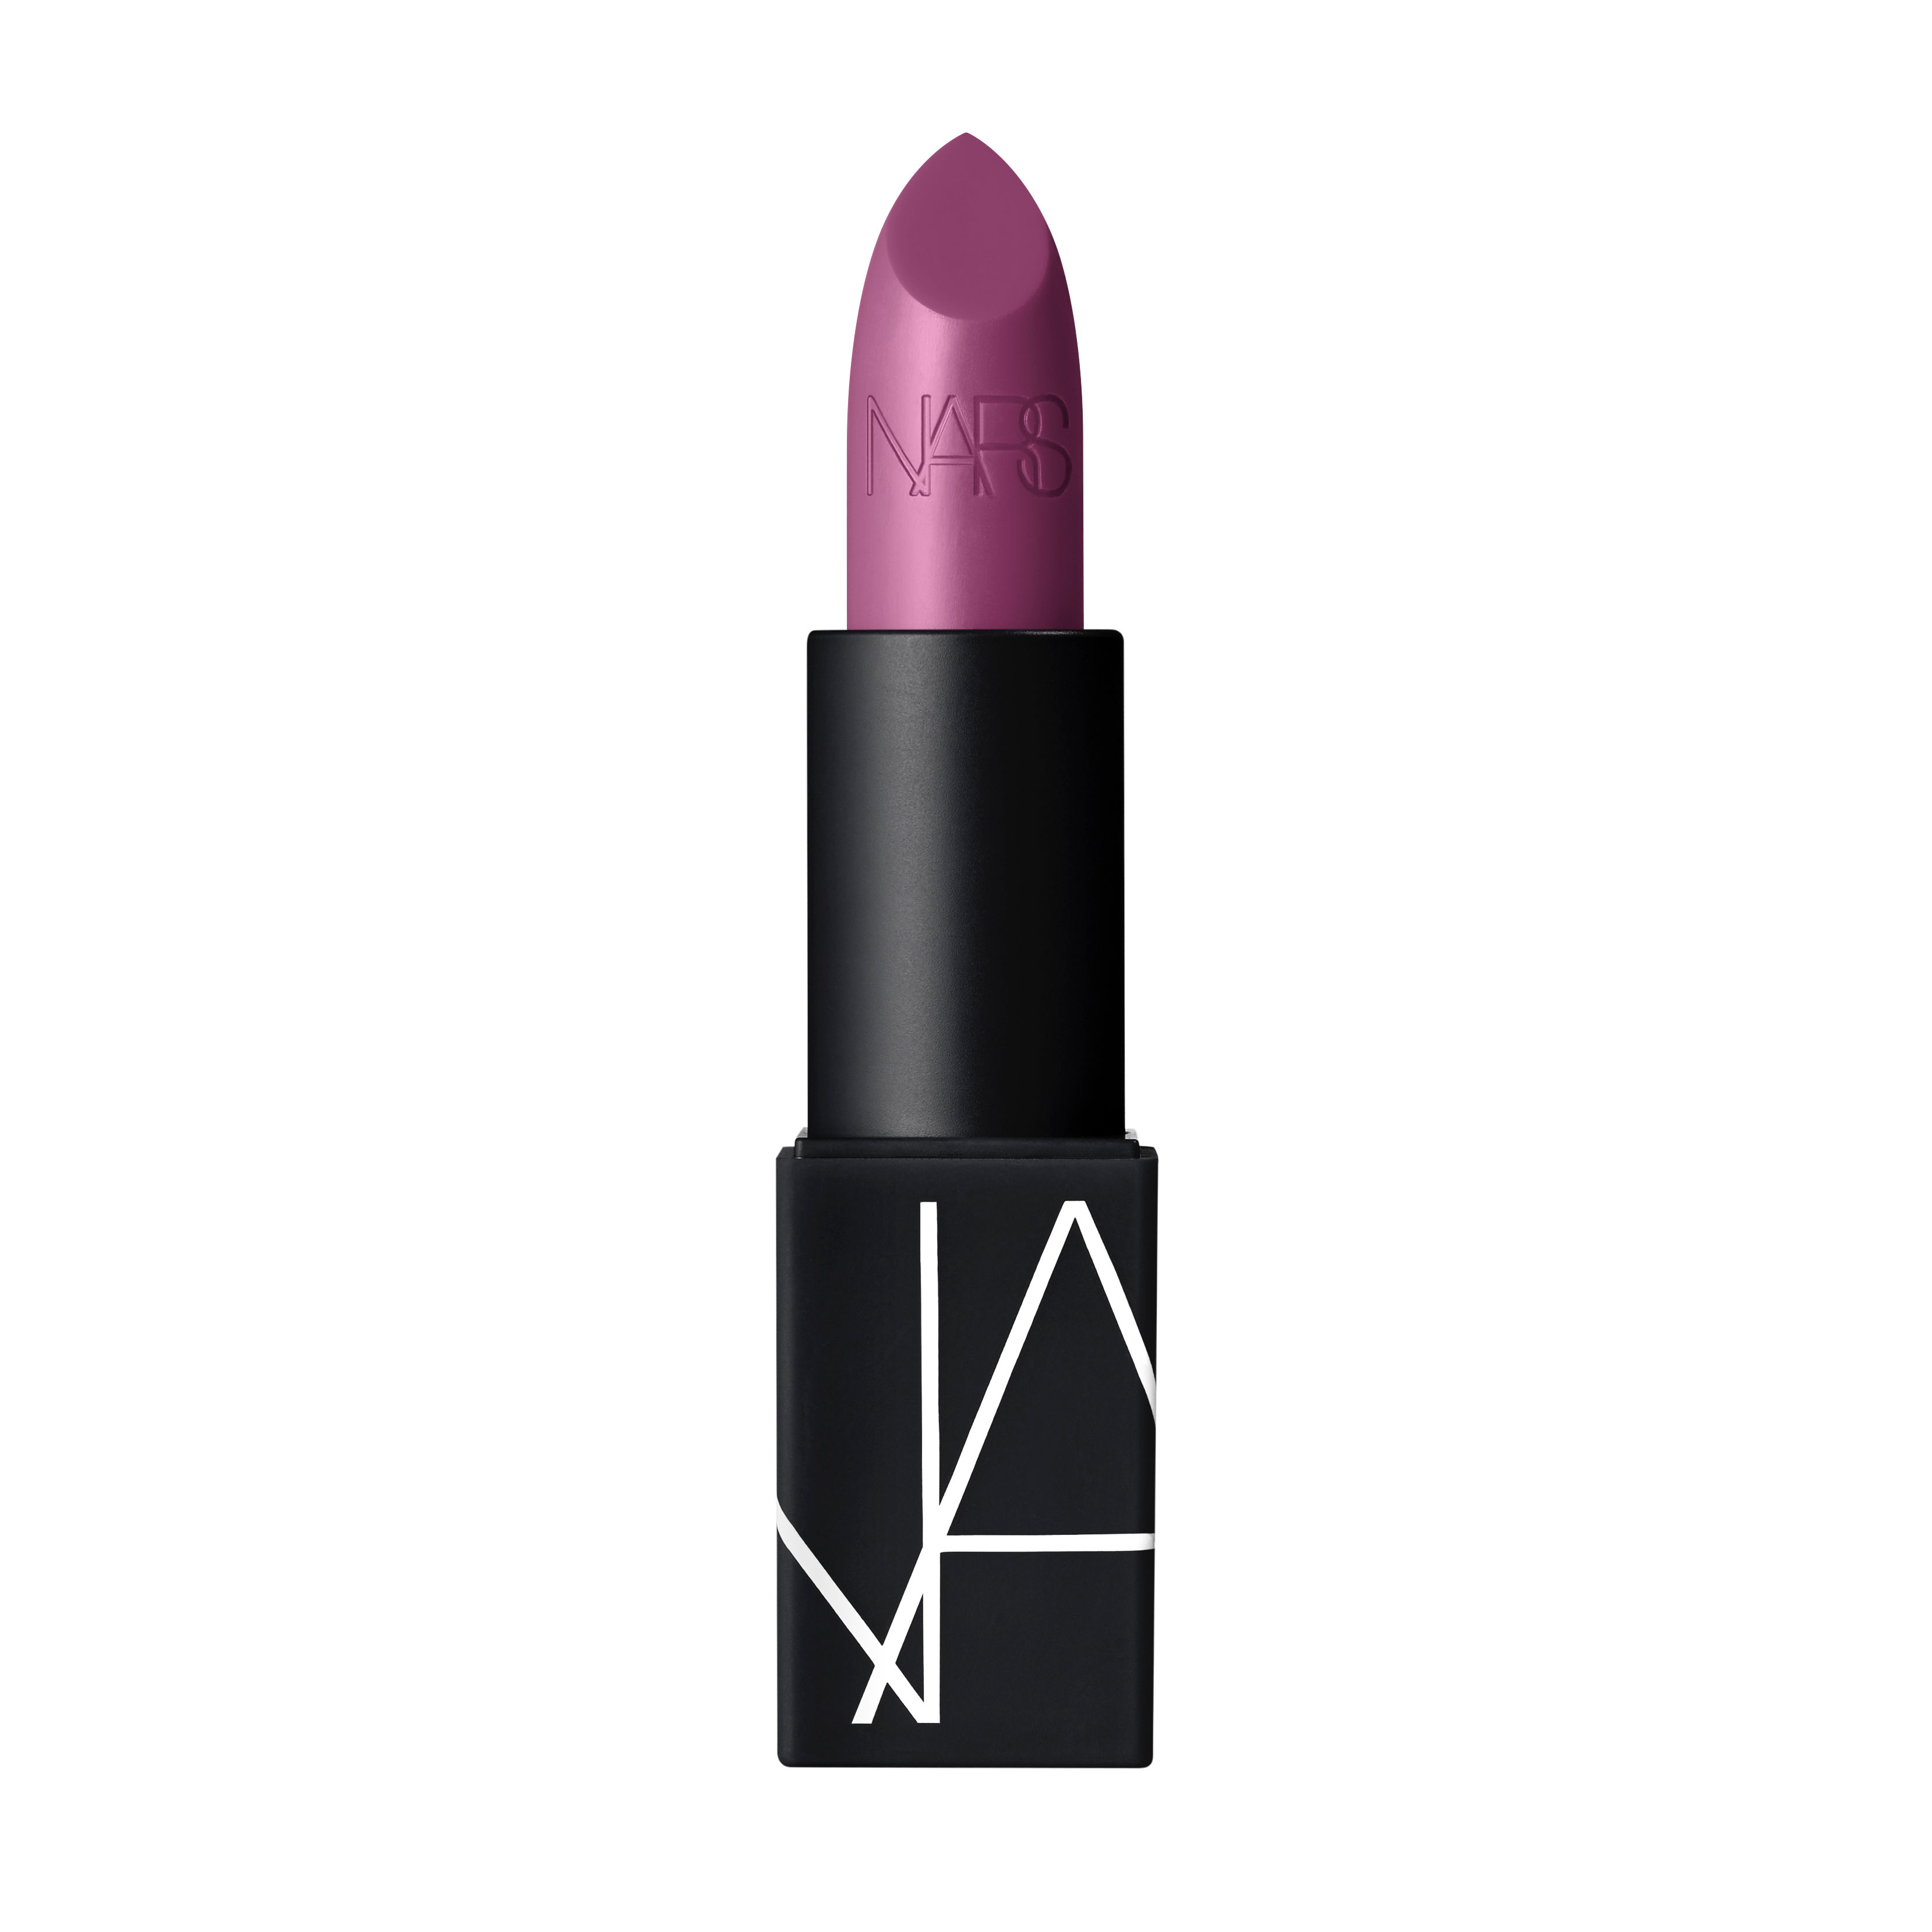 NARS Candy Stripper Sheer Lipstick Product Image